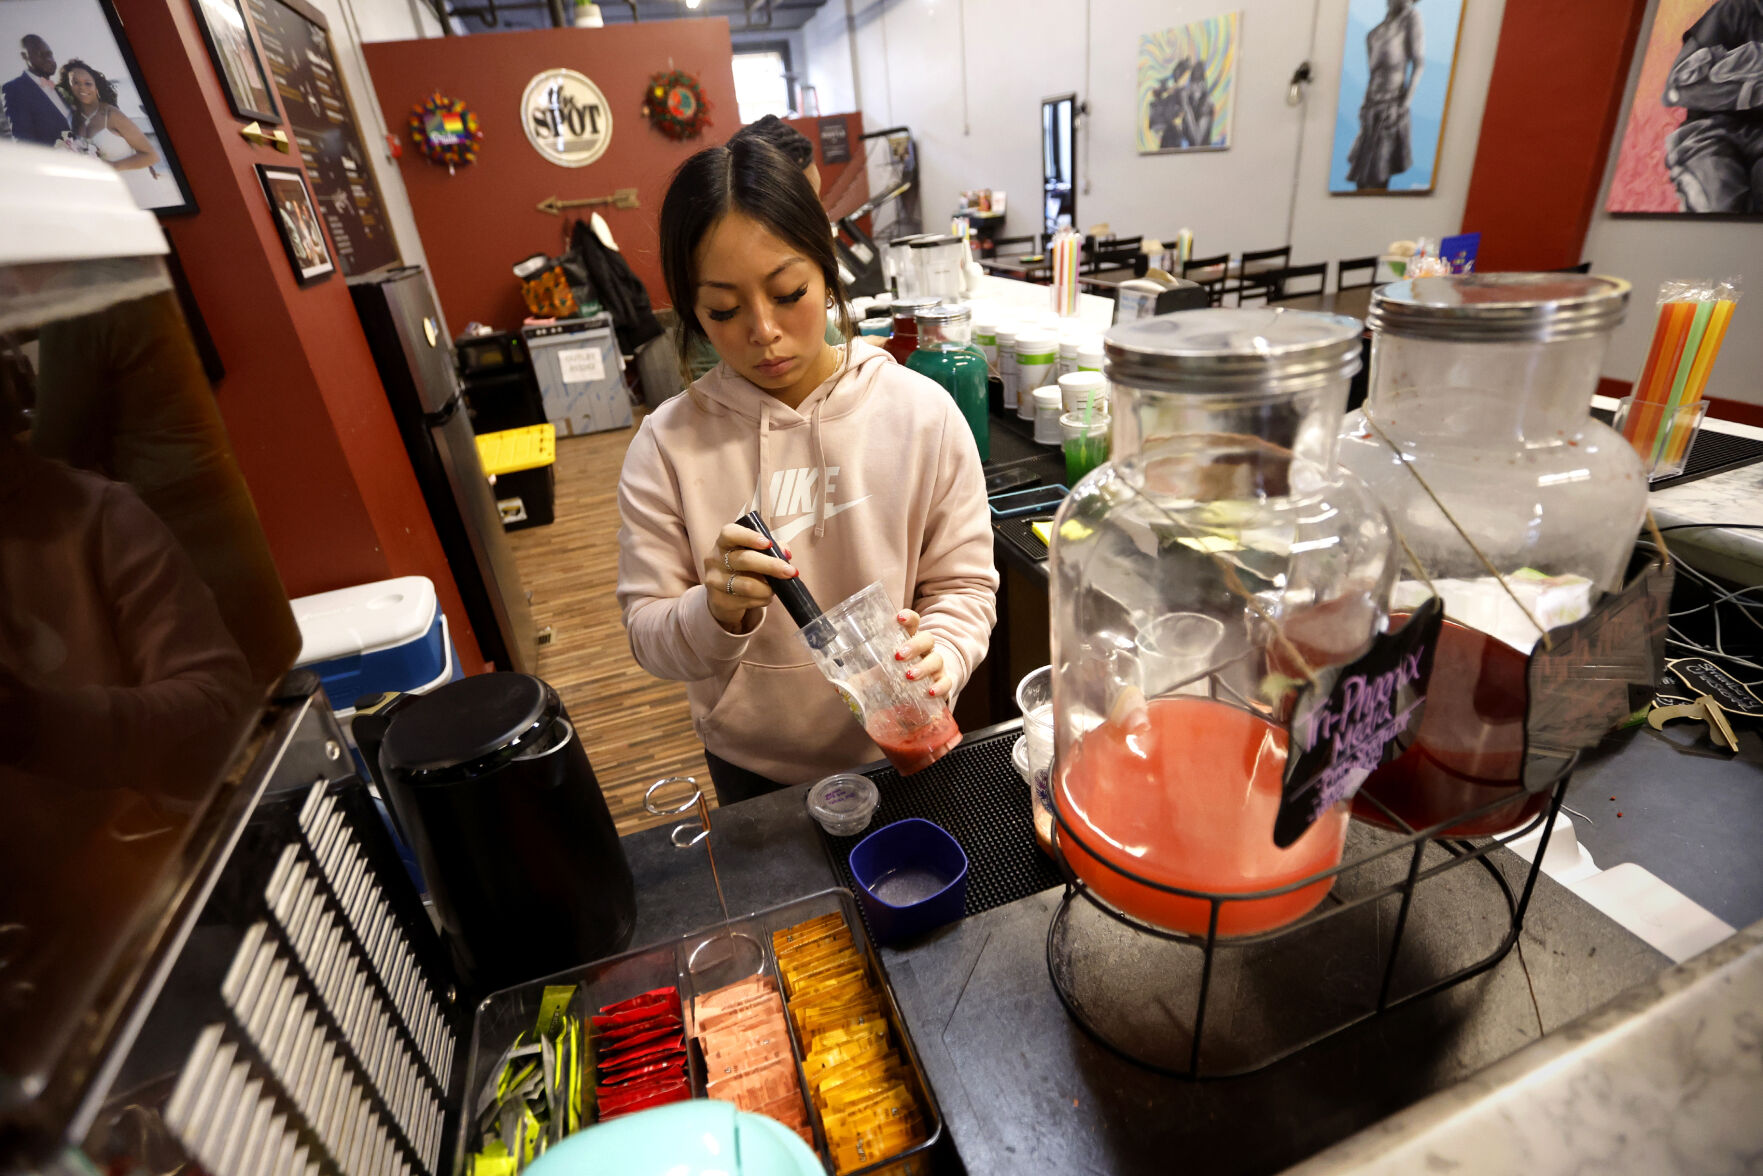 Jennifer Bardon makes a drink at The Spot Nutrition in Dubuque.    PHOTO CREDIT: Jessica Reilly